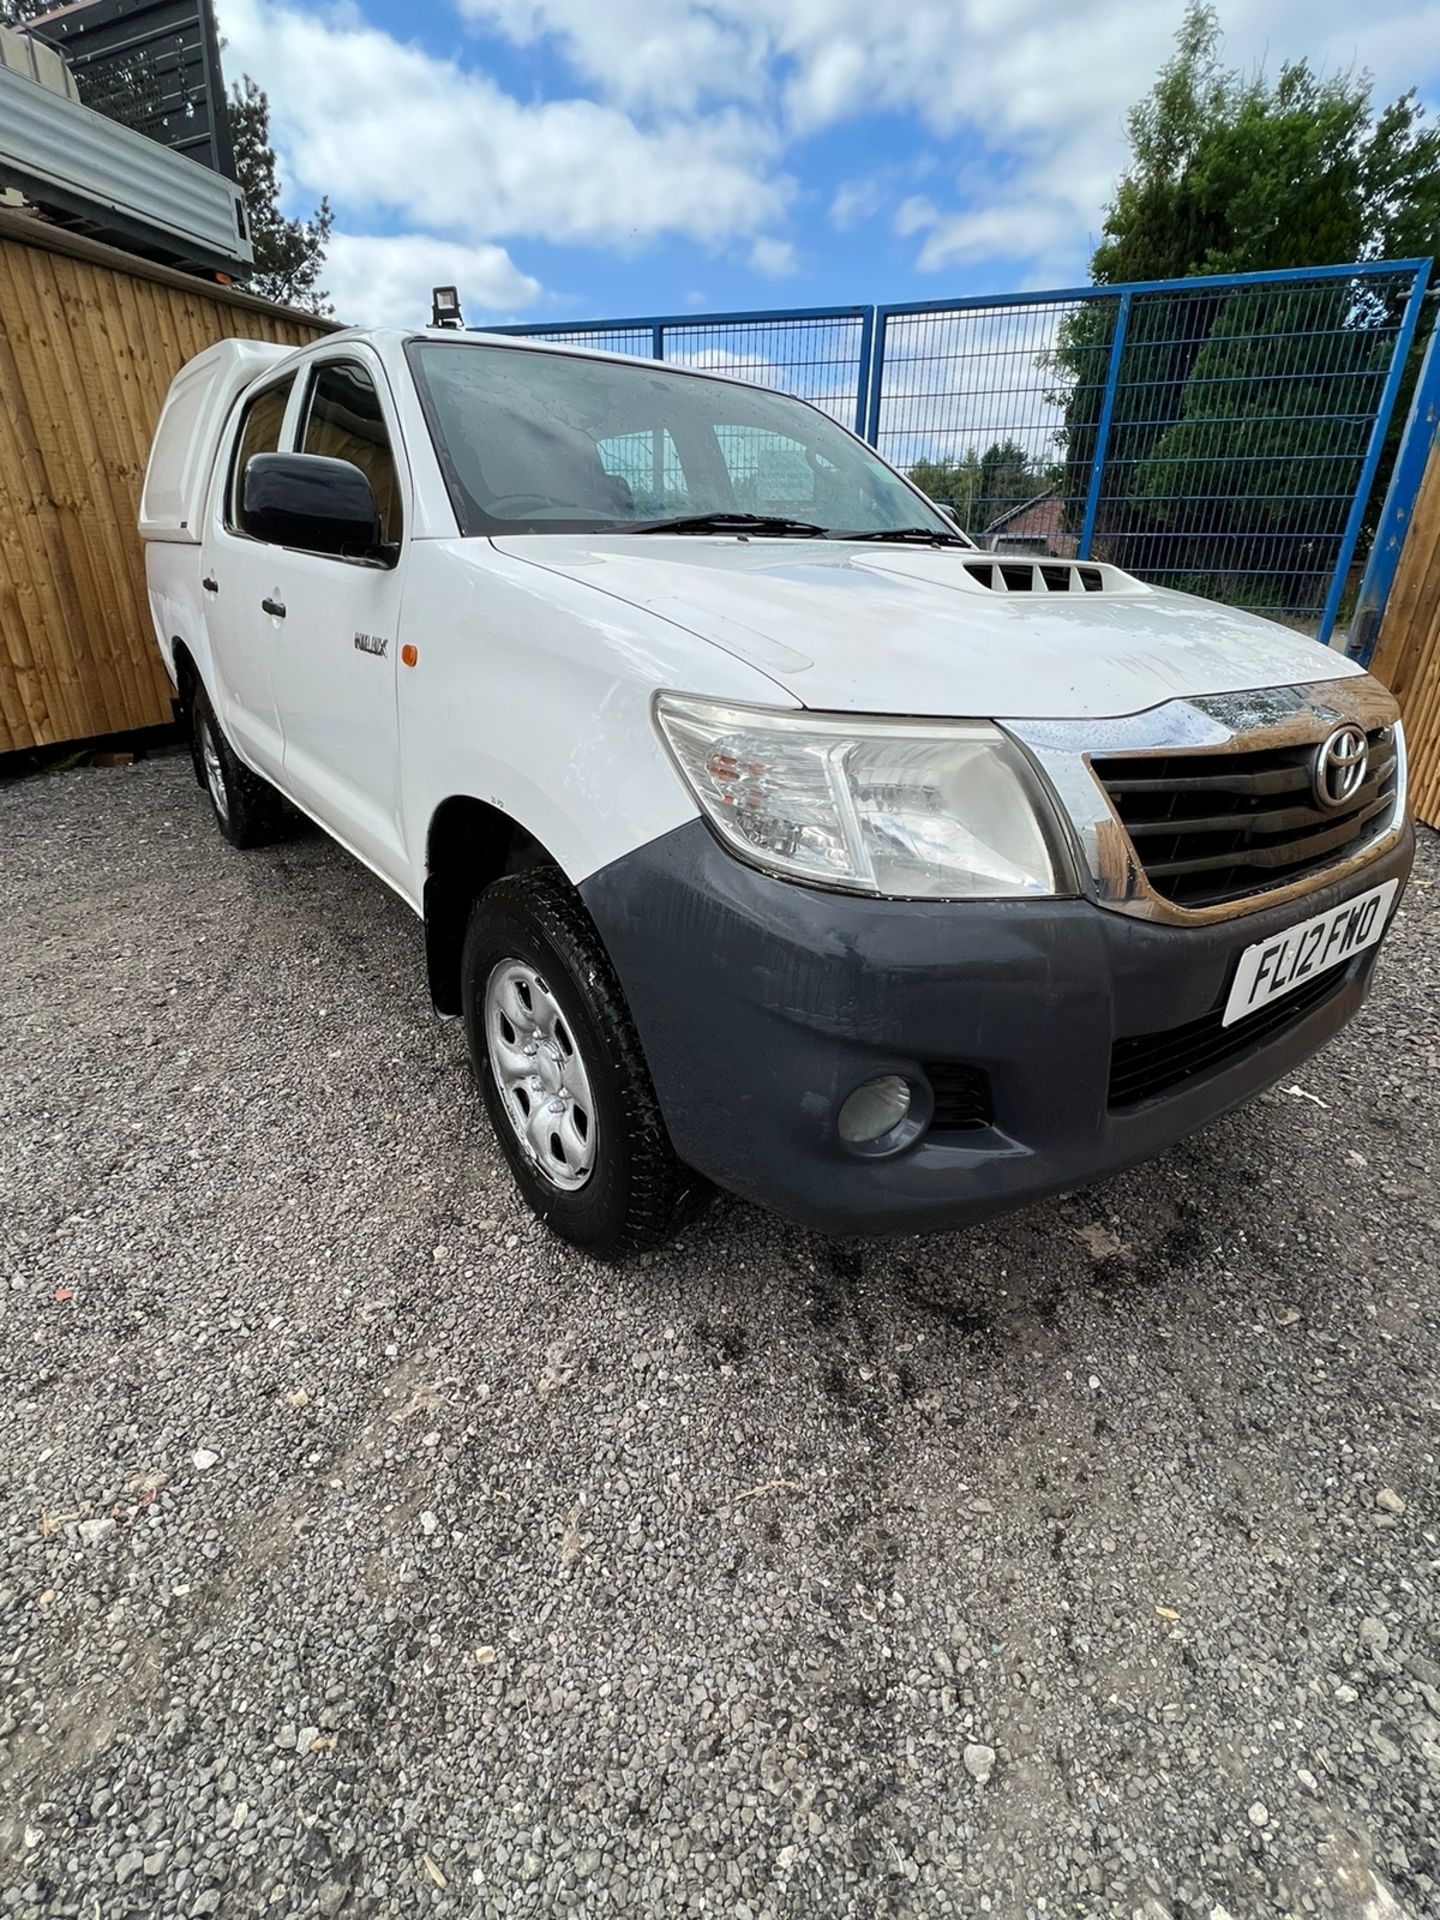 2012 TOYOTA HILUX HL2 PICK UP - DAB RADIO - A/C - ELECTRIC MIRRORS. - Image 4 of 14